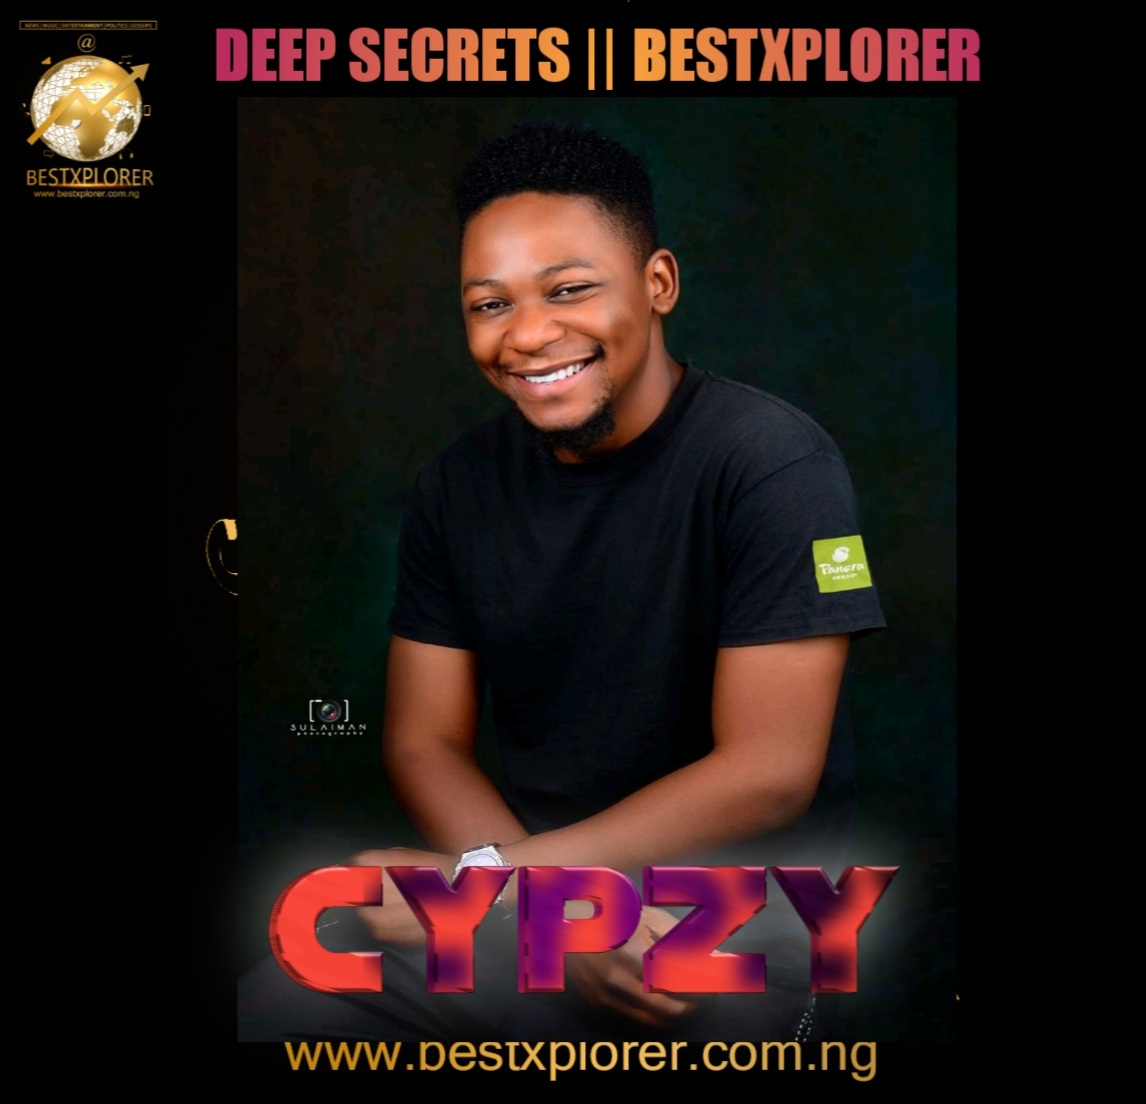 Deep Secrets: Meet Cypzy And Know Some Of His Secrets